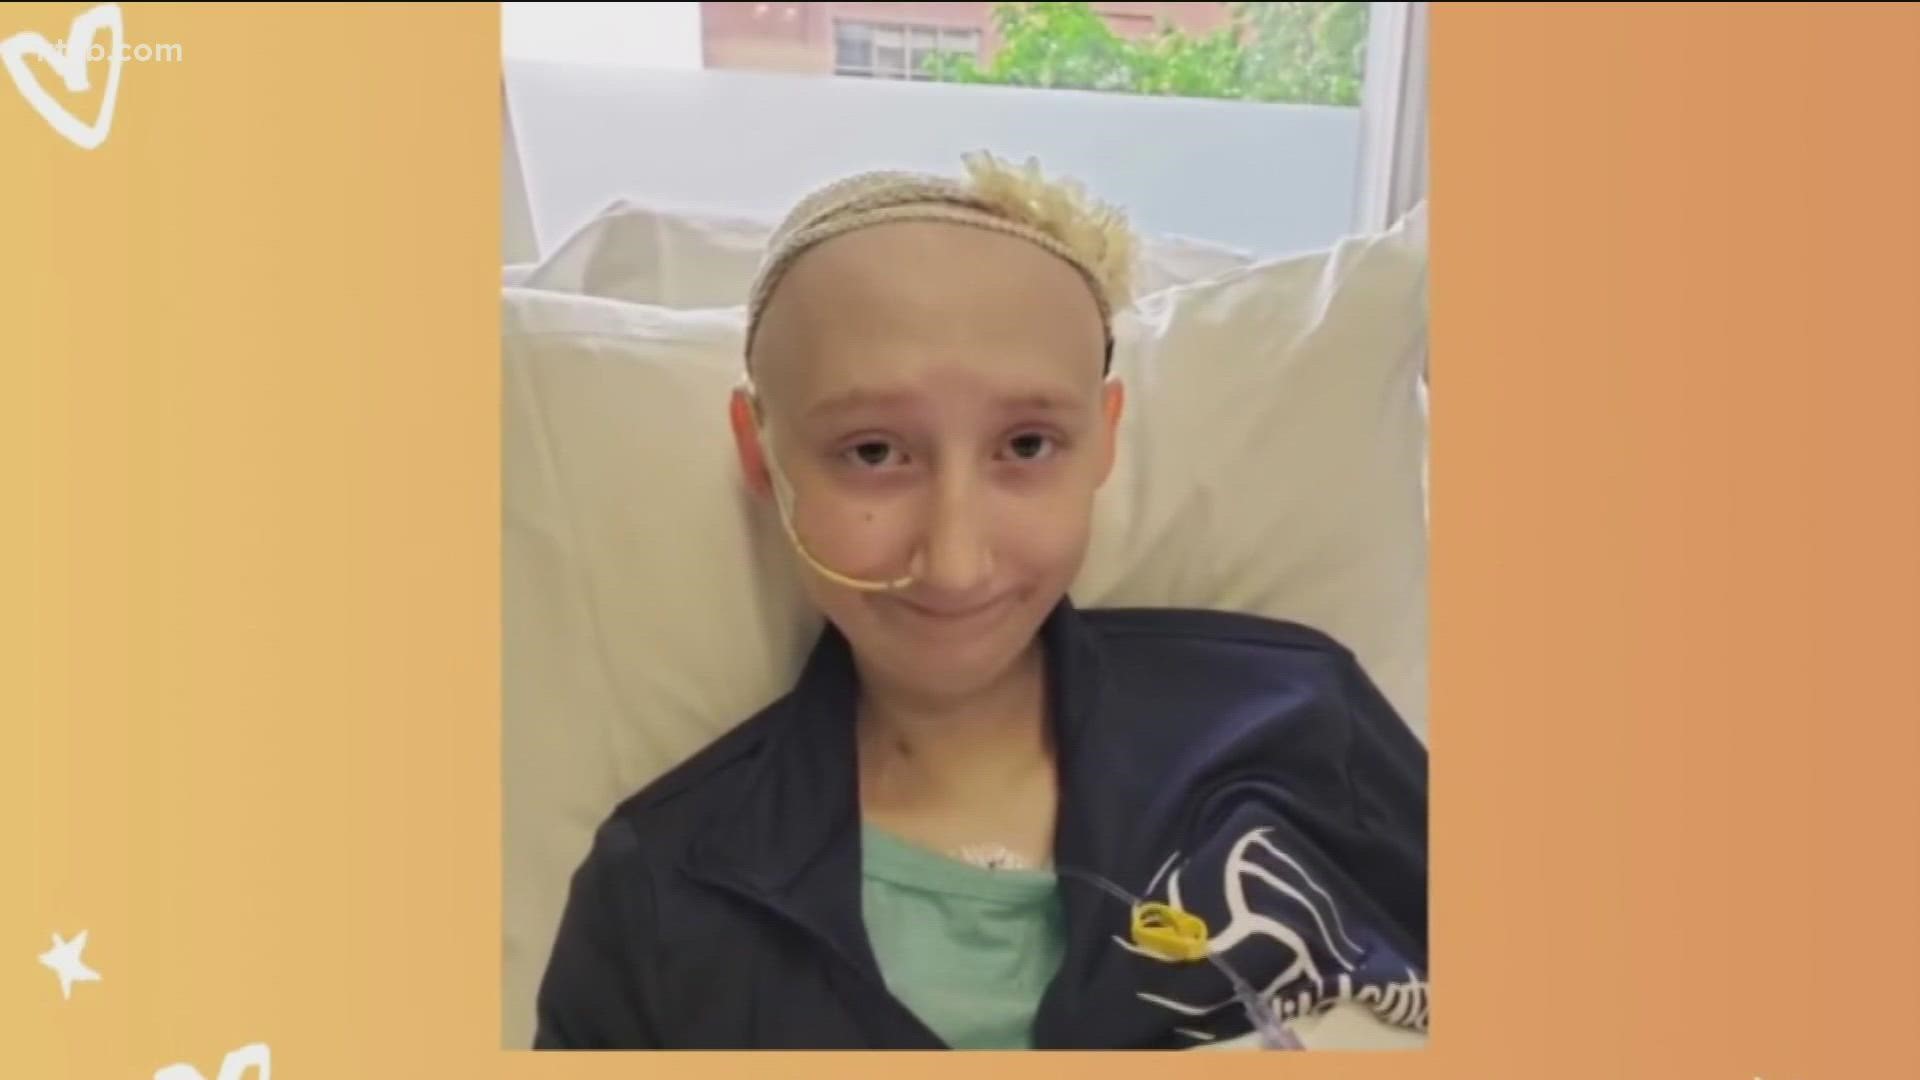 Jessie Severns, 17, was diagnosed with leukemia in 2019. After almost three years, she rang the bell in front of friends, family and the heroes who saved her life.